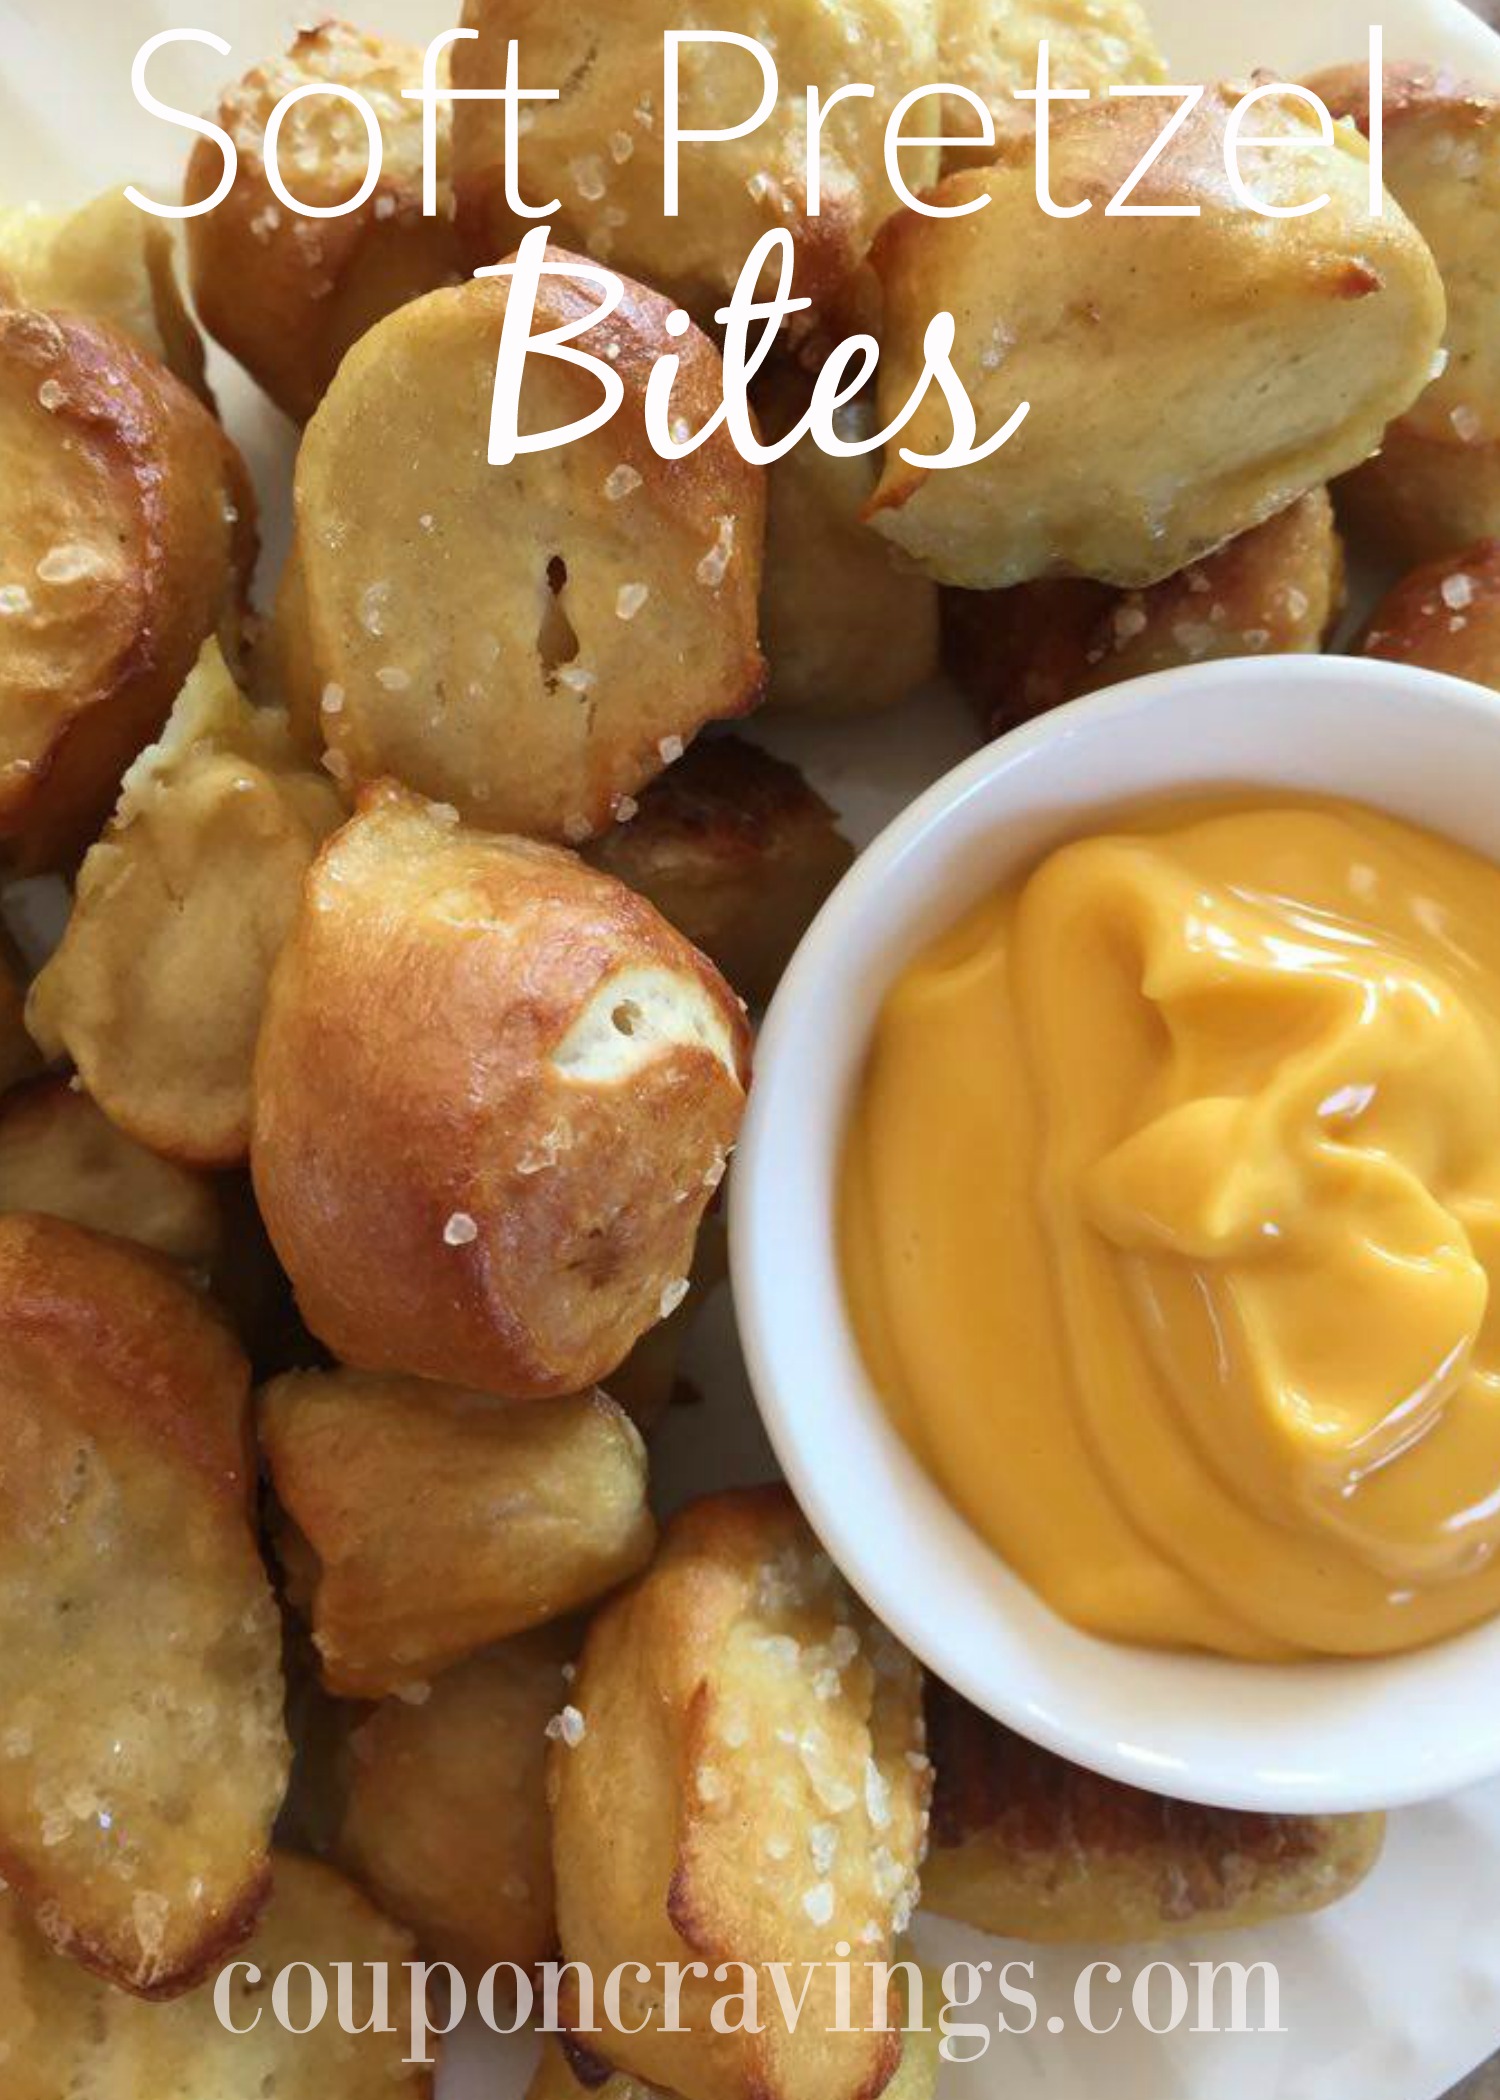 These homemade pretzel bites are an easier appetizer than you think! And they're delicious - a kids appetizer for sure! https://couponcravings.com/